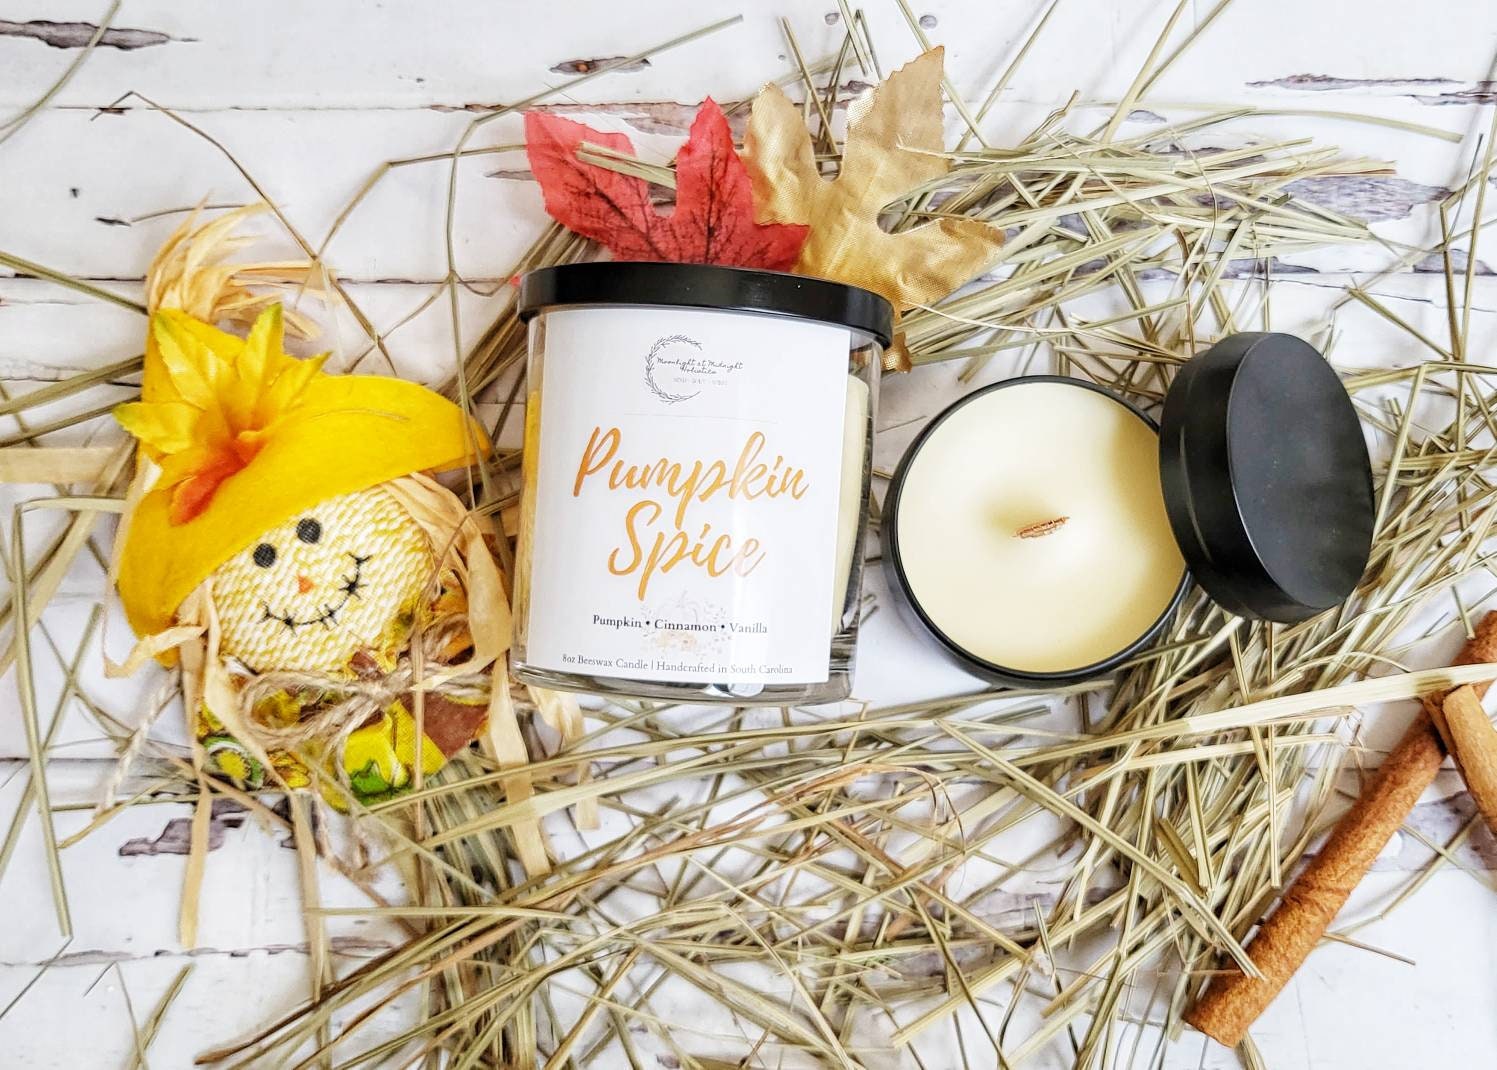 PUMPKIN SPICE | Handmade Wood Wick Beeswax Candle | Aromatherapy Candles | Tumbler Jar Candle | Sweet Scented Fall Candles | New Home Gifts